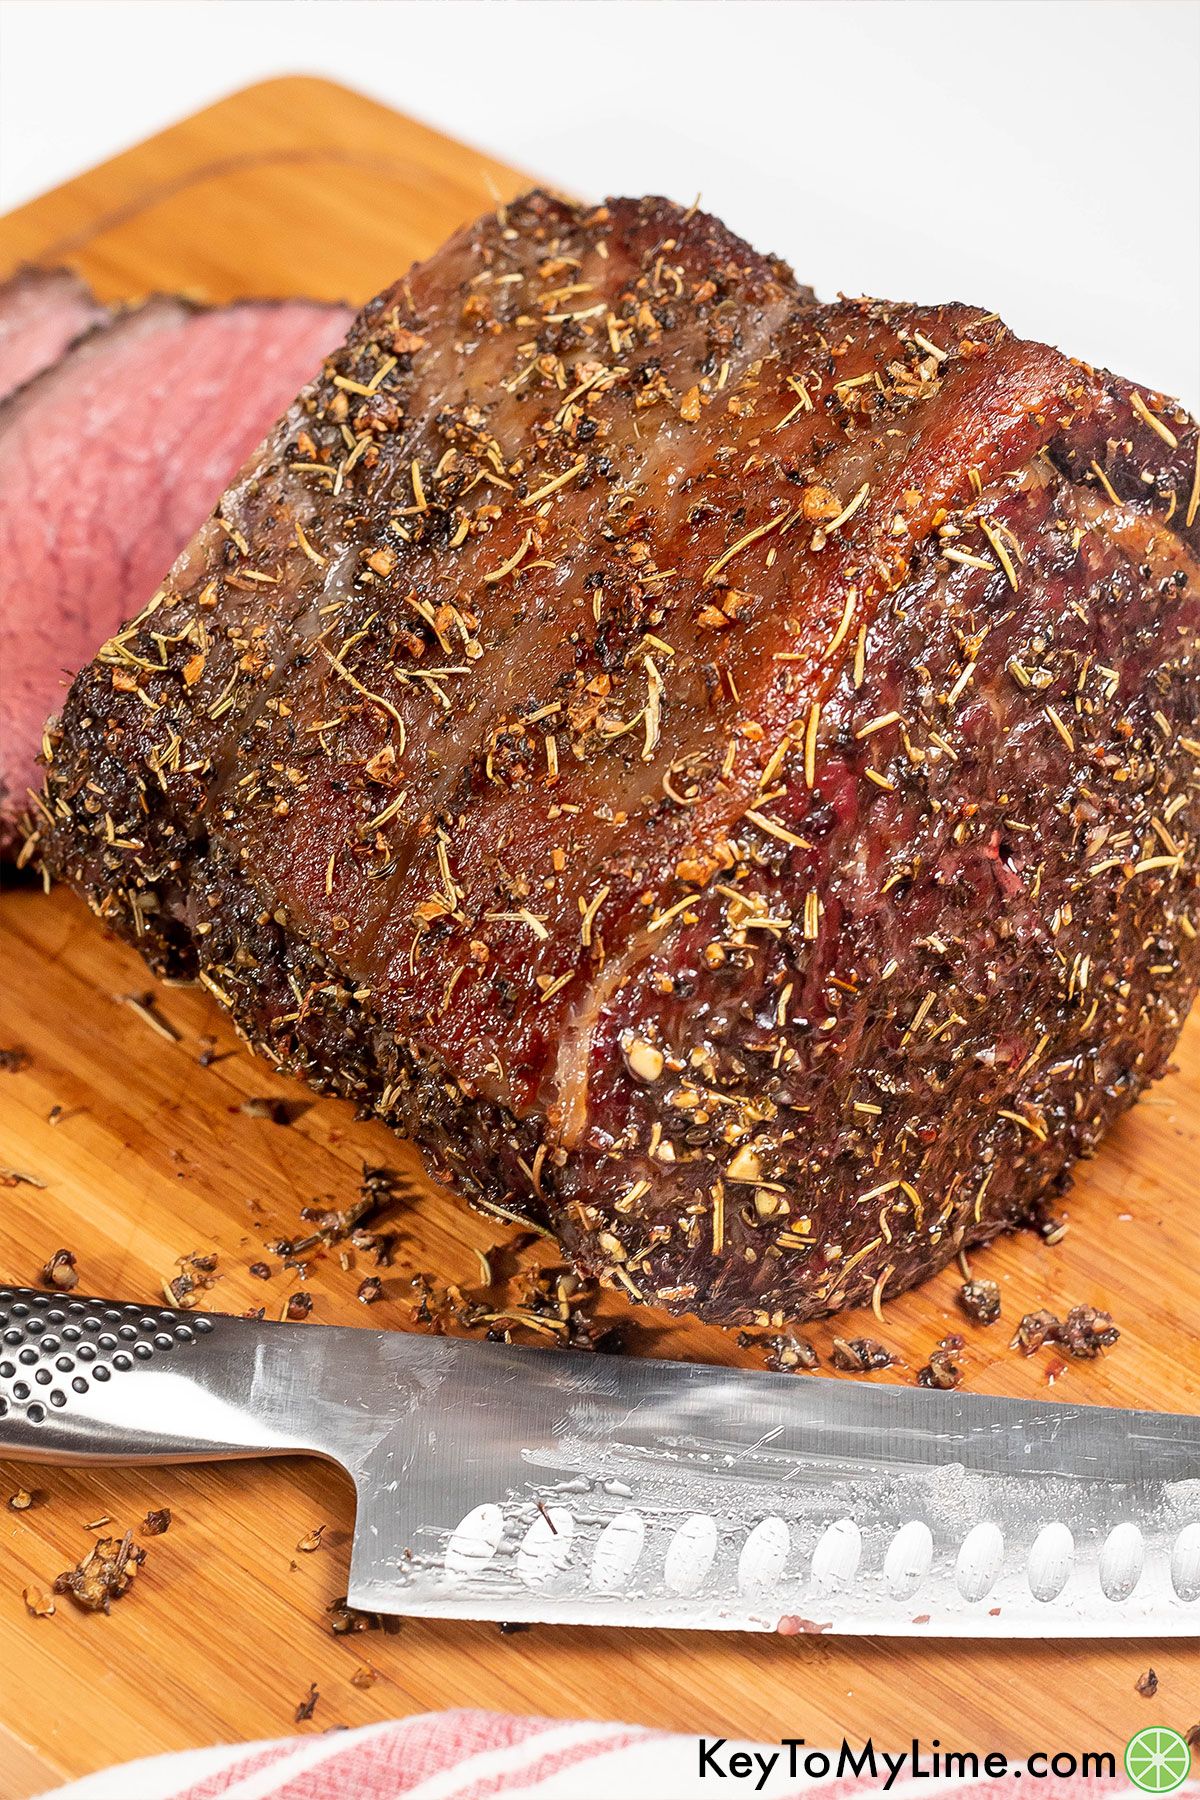 A beautiful perfectly cooked roast showing the inside texture.